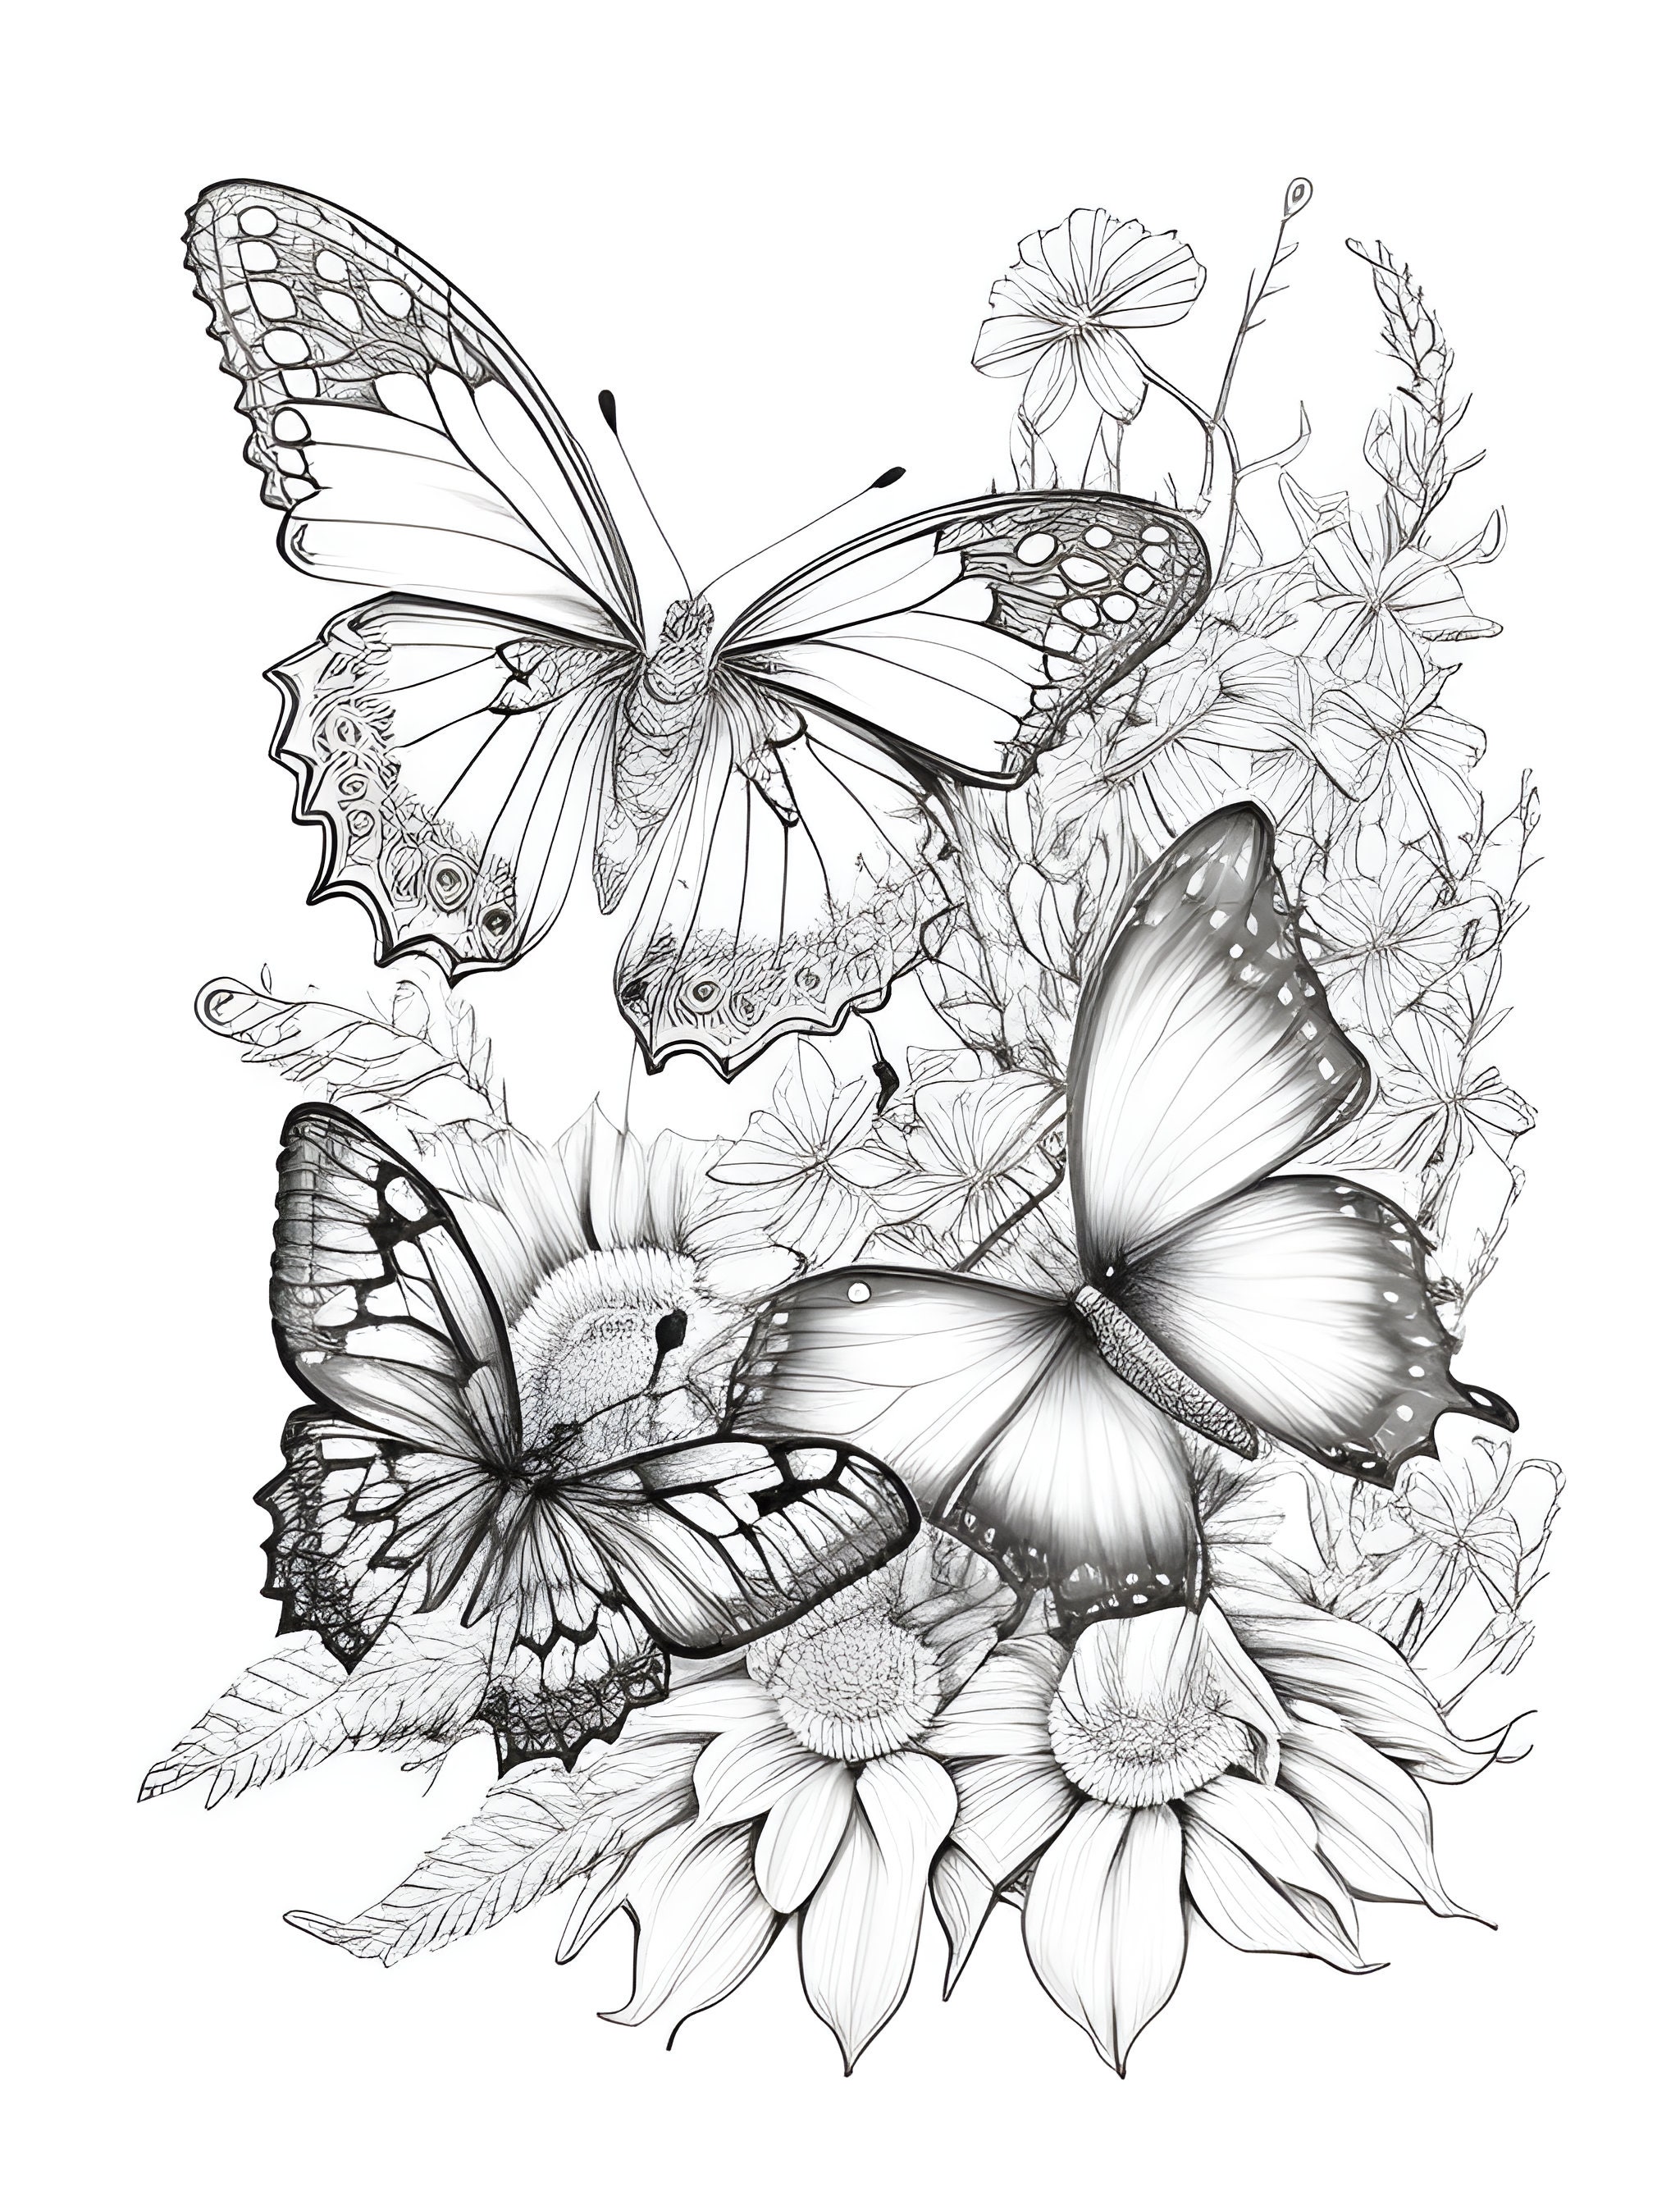 New &Expanded Adult coloring book more than 30 butterflys to color: cute  adults coloring pages for adults, boys, girls, woman's, men,30 butterfly's  De (Paperback)